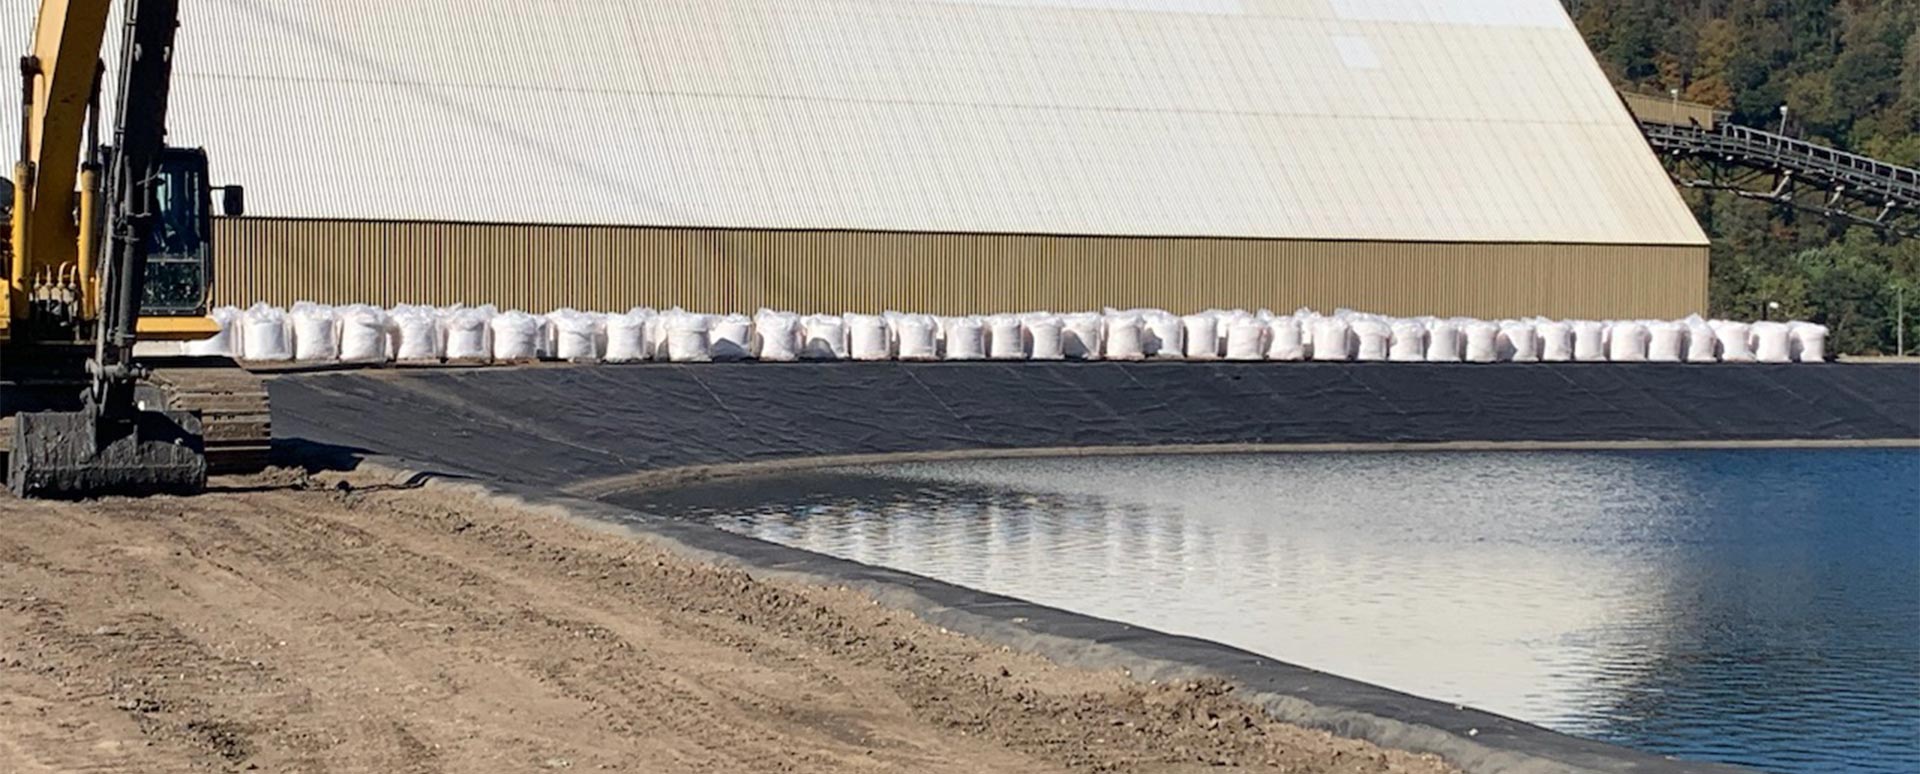 Supersacks lined in a row at a powerplant